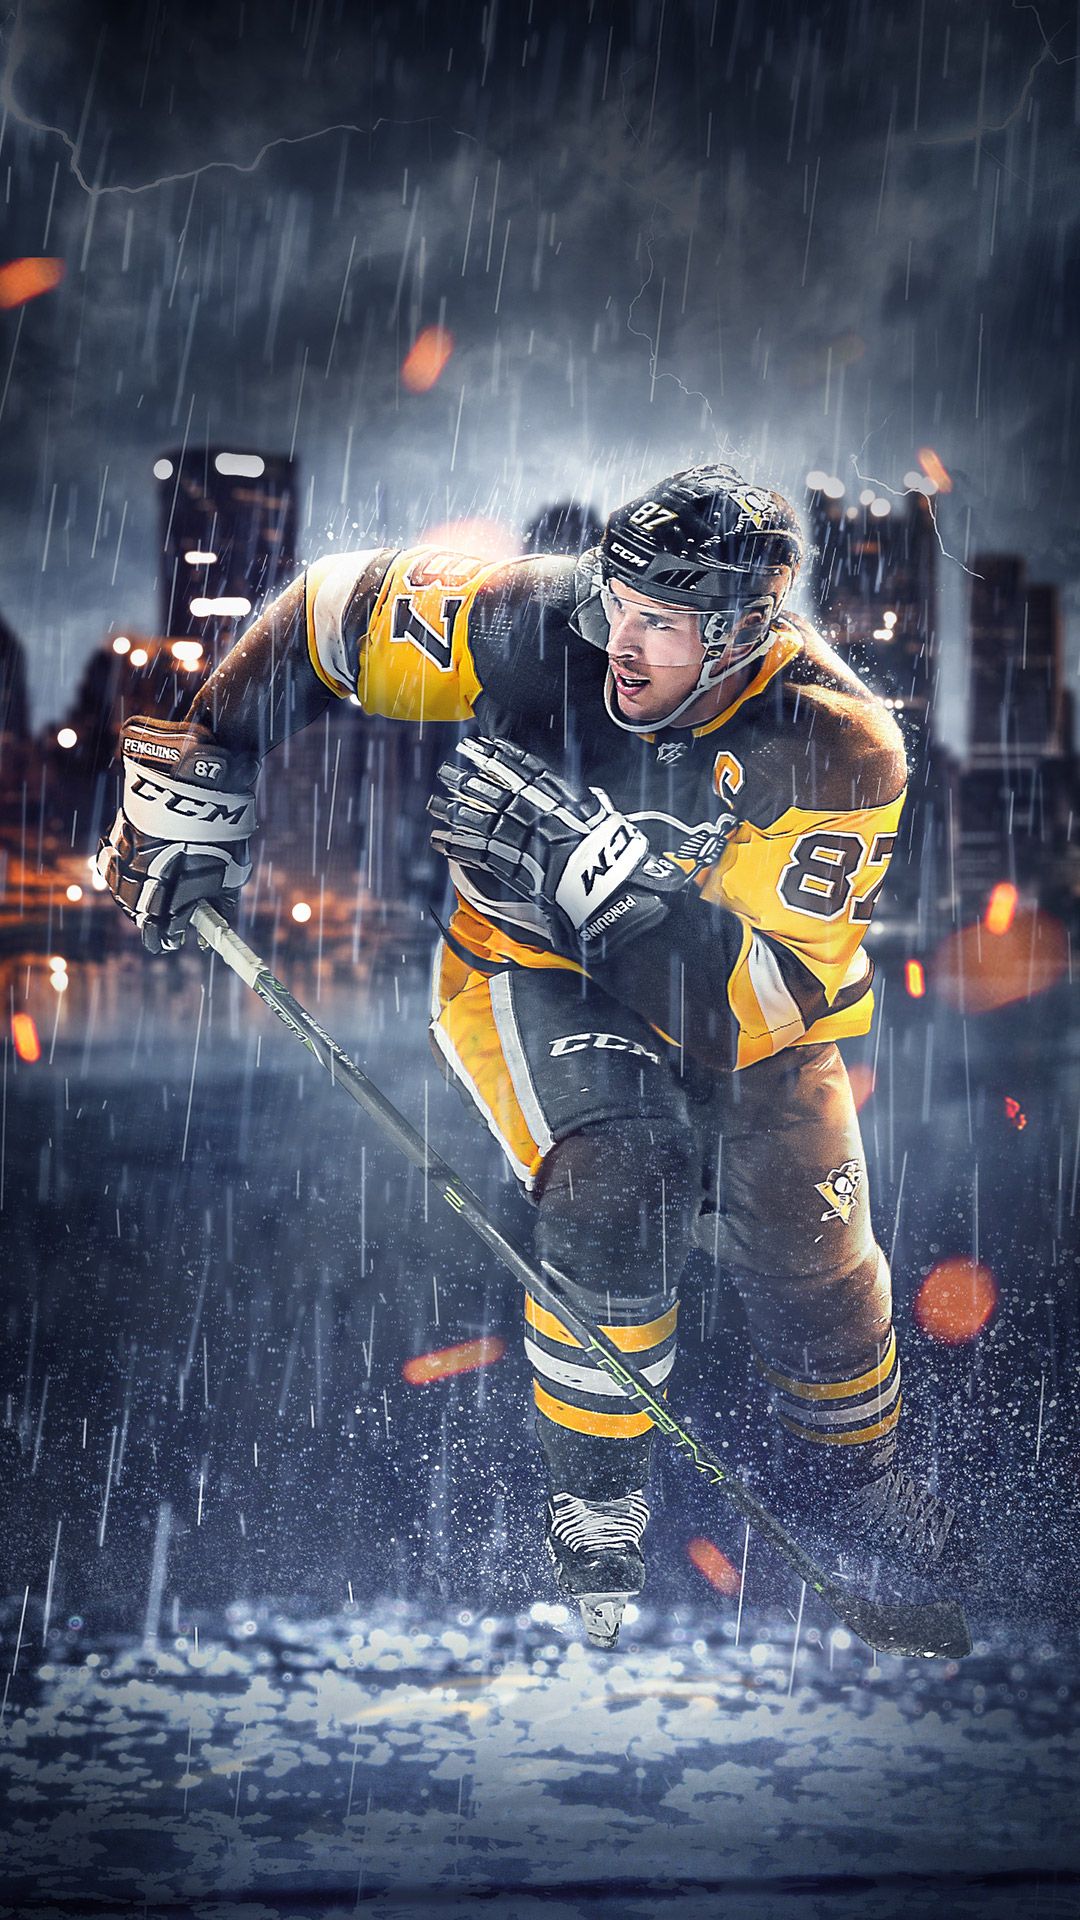 Download Get Ready to Play Cool Hockey Wallpaper